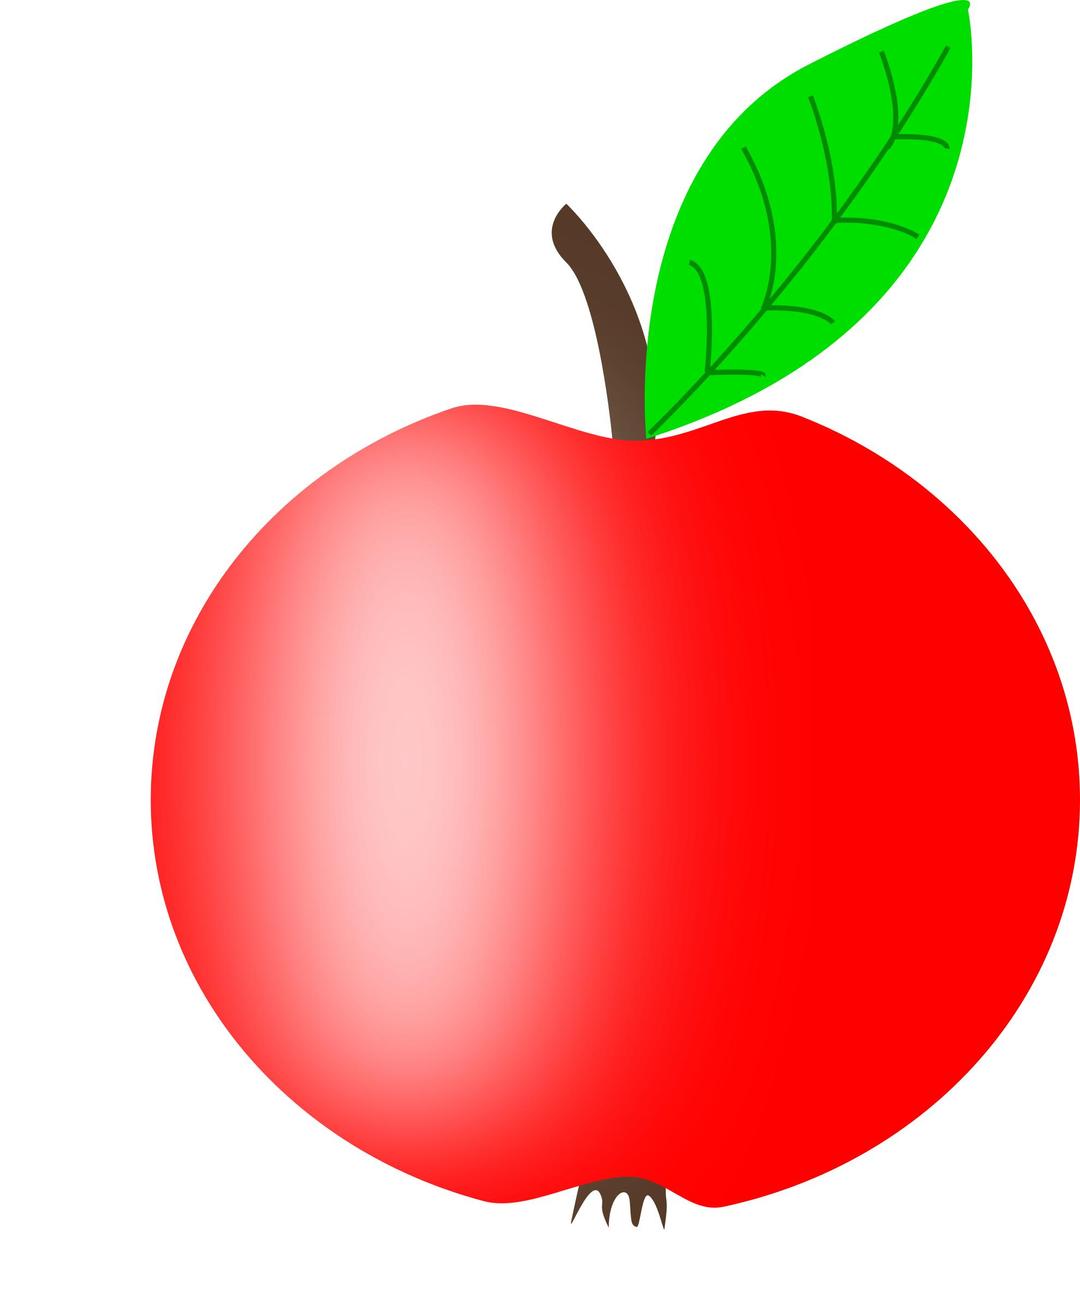 Apple Red with a Green Leaf png transparent